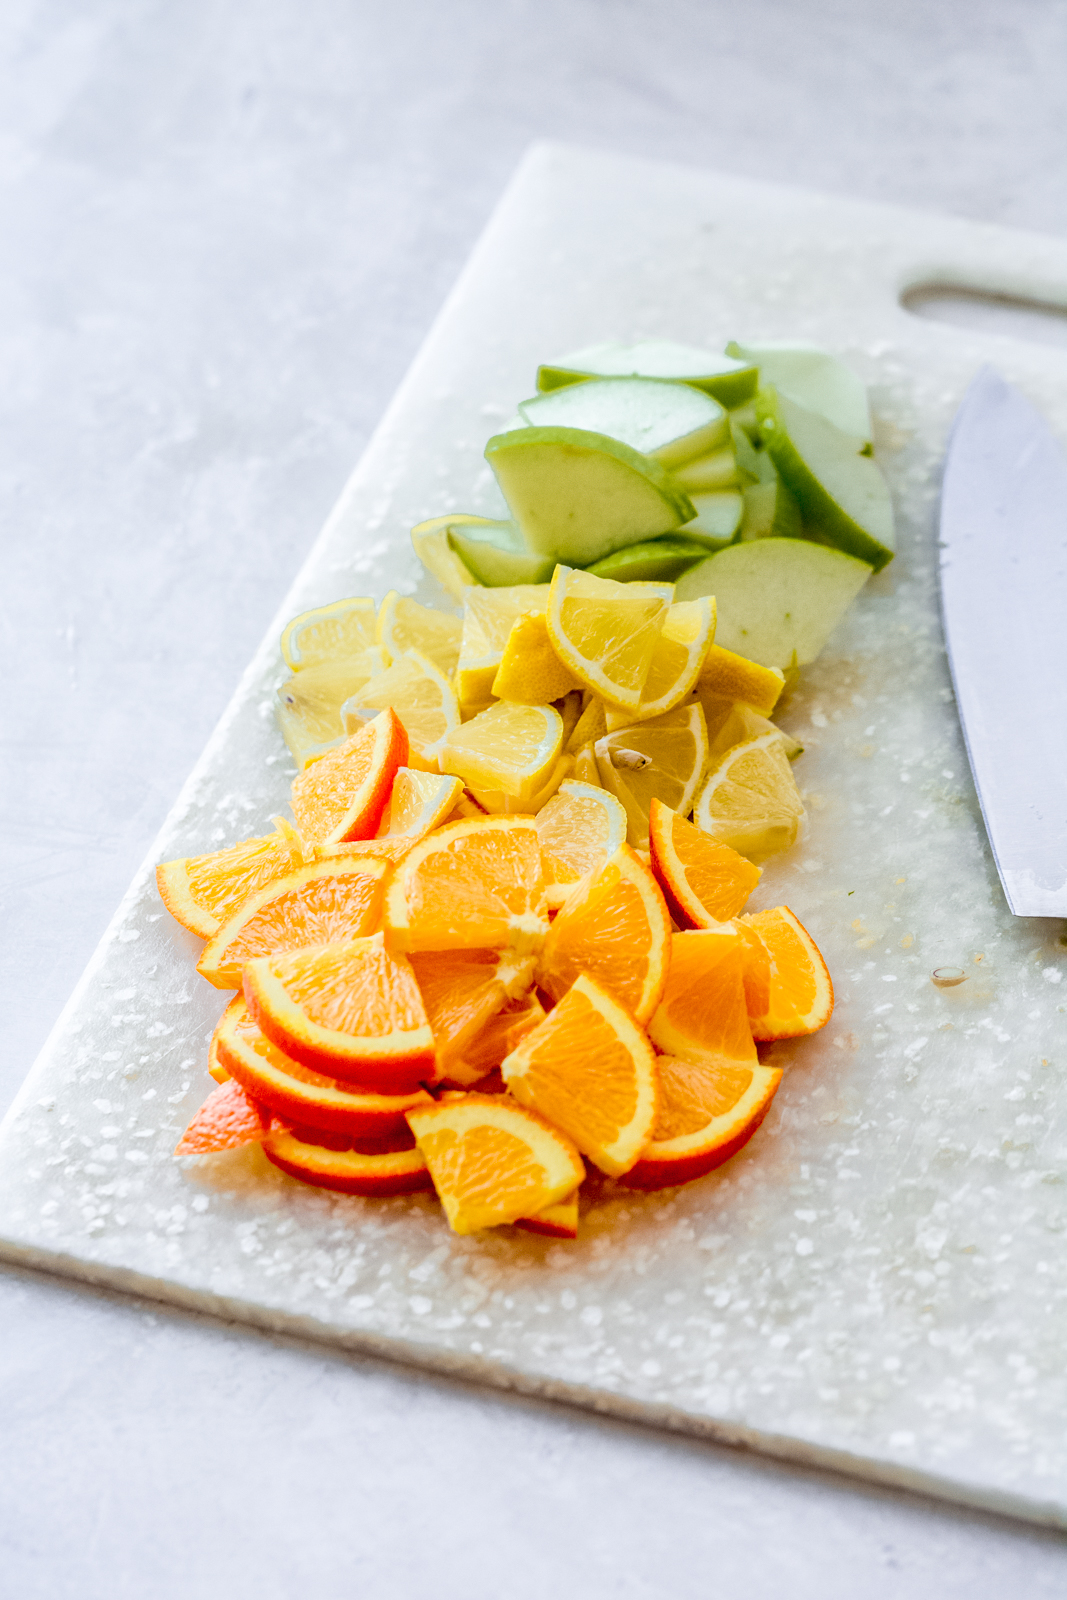 cut up citrus slices wedges on white cutting board with knife